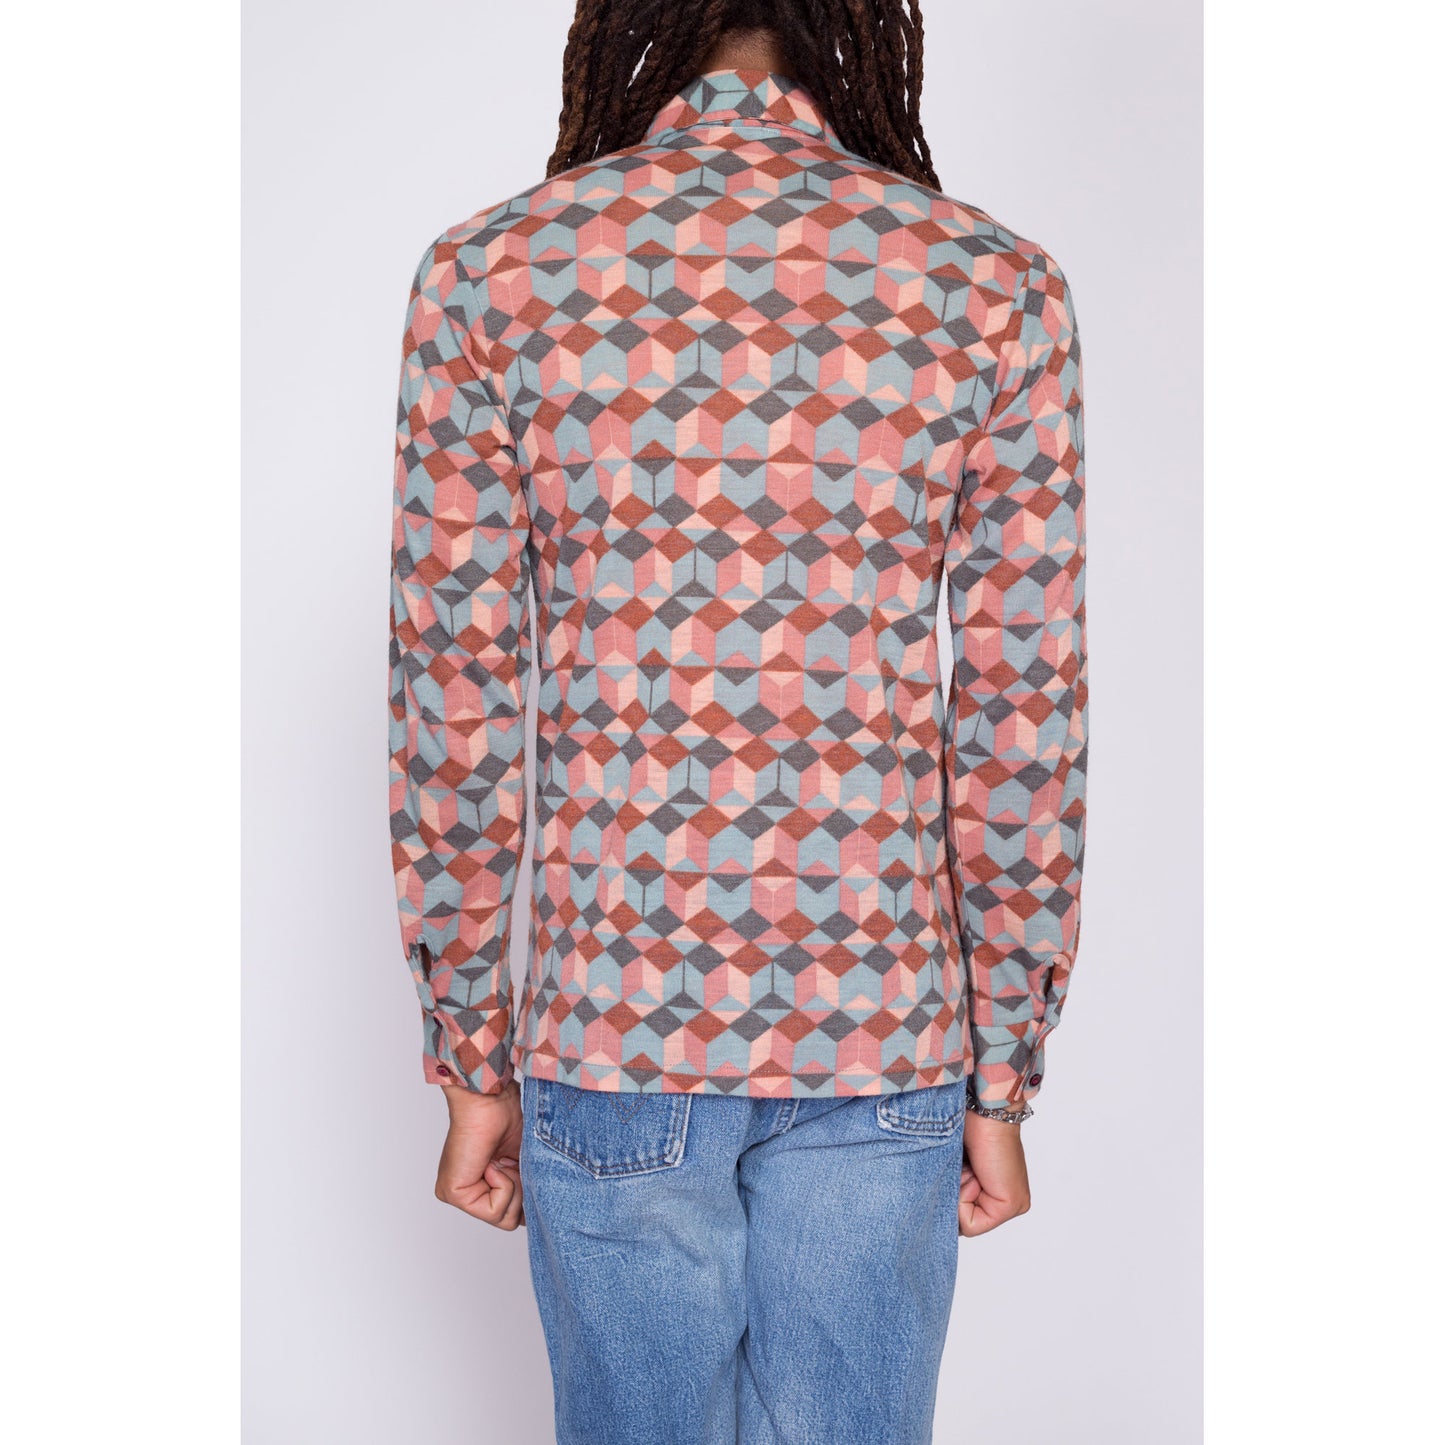 70s Optical Illusion Knit Disco Shirt - Men's Small | Vintage Abstract Geometric Op Art Collared Long Sleeve Top